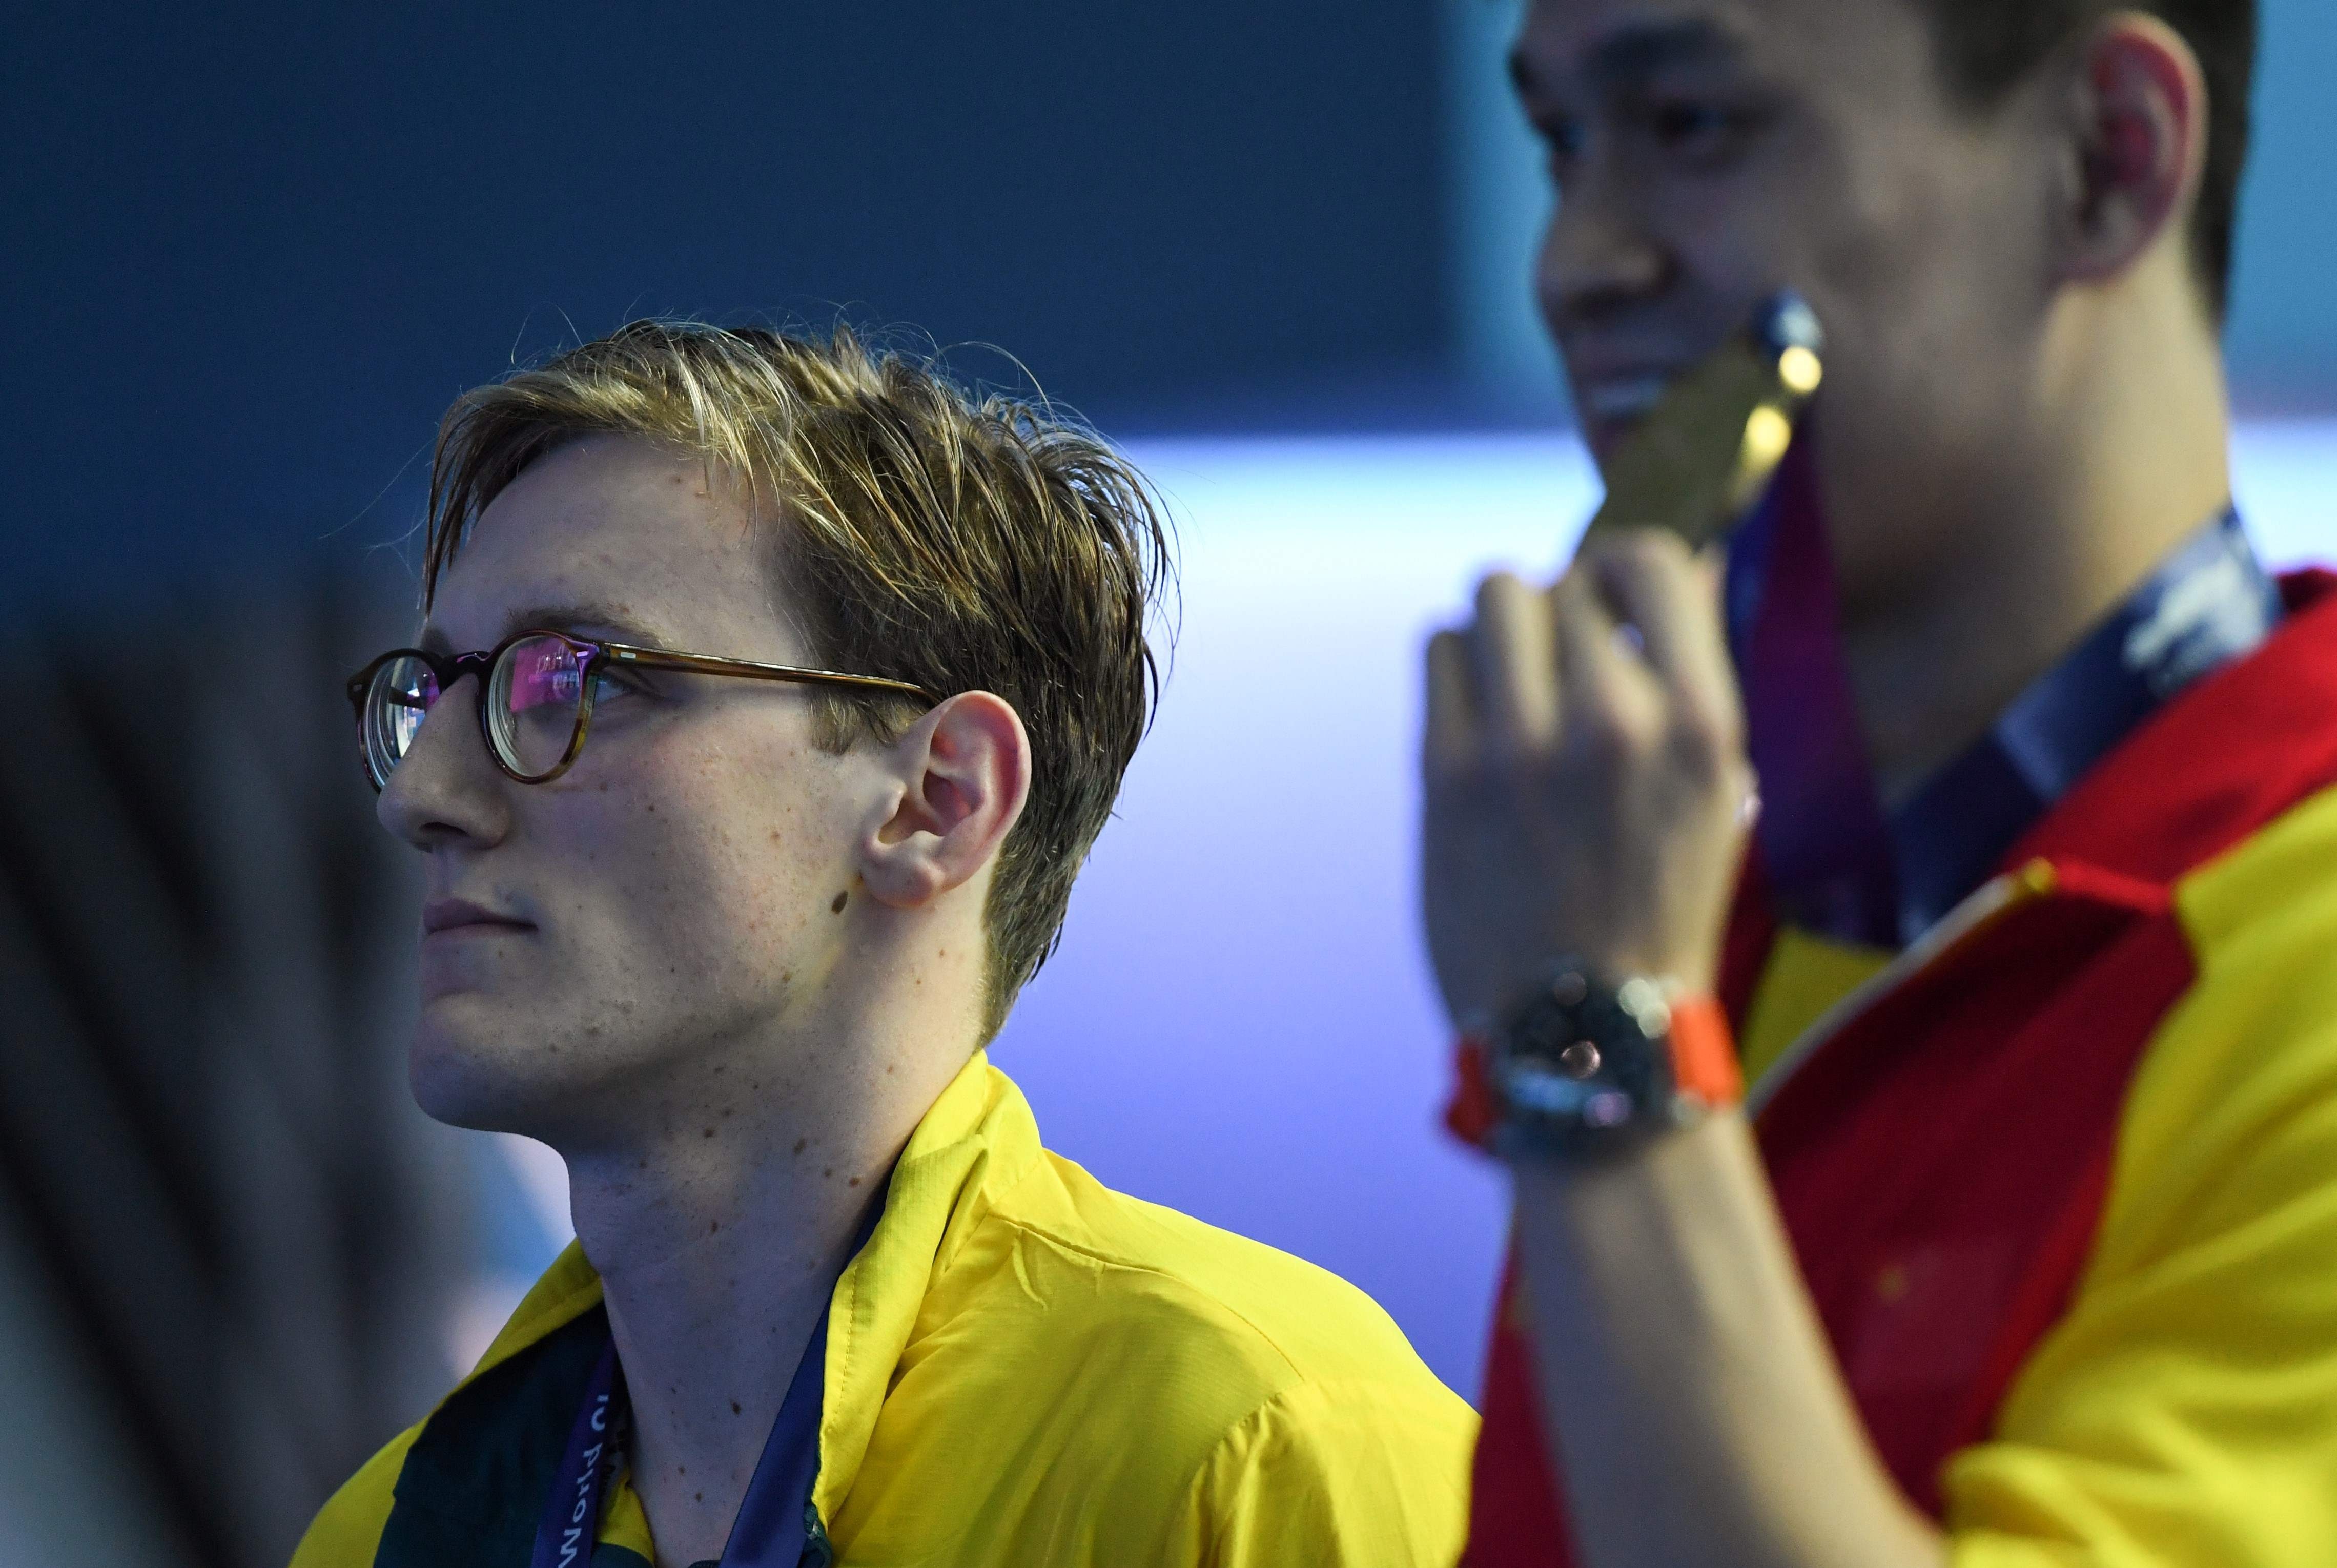 Silver medallist Mack Horton of Australia refuses to take the podium with gold medallist Sun Yang of China after the men’s 400m freestyle final at the 2019 FINA World Championships in Gwangju on July 21. Photo: AFP